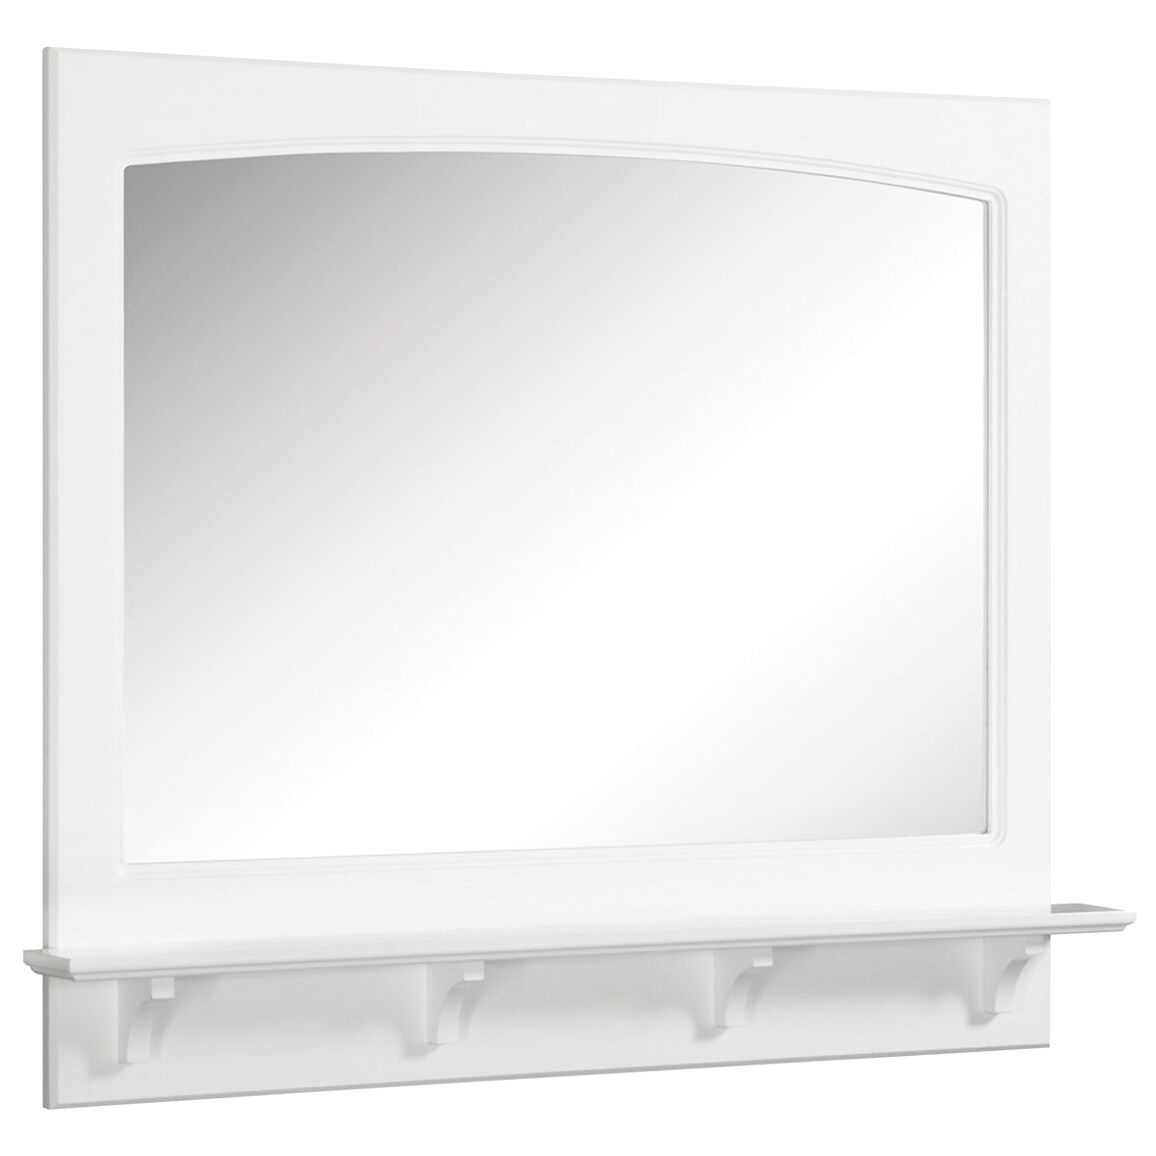 Design House 539940-WHT Transitional Concord 36-Inch Fully Assembled Bathroom Vanity Decorative Mirror With Shelf White